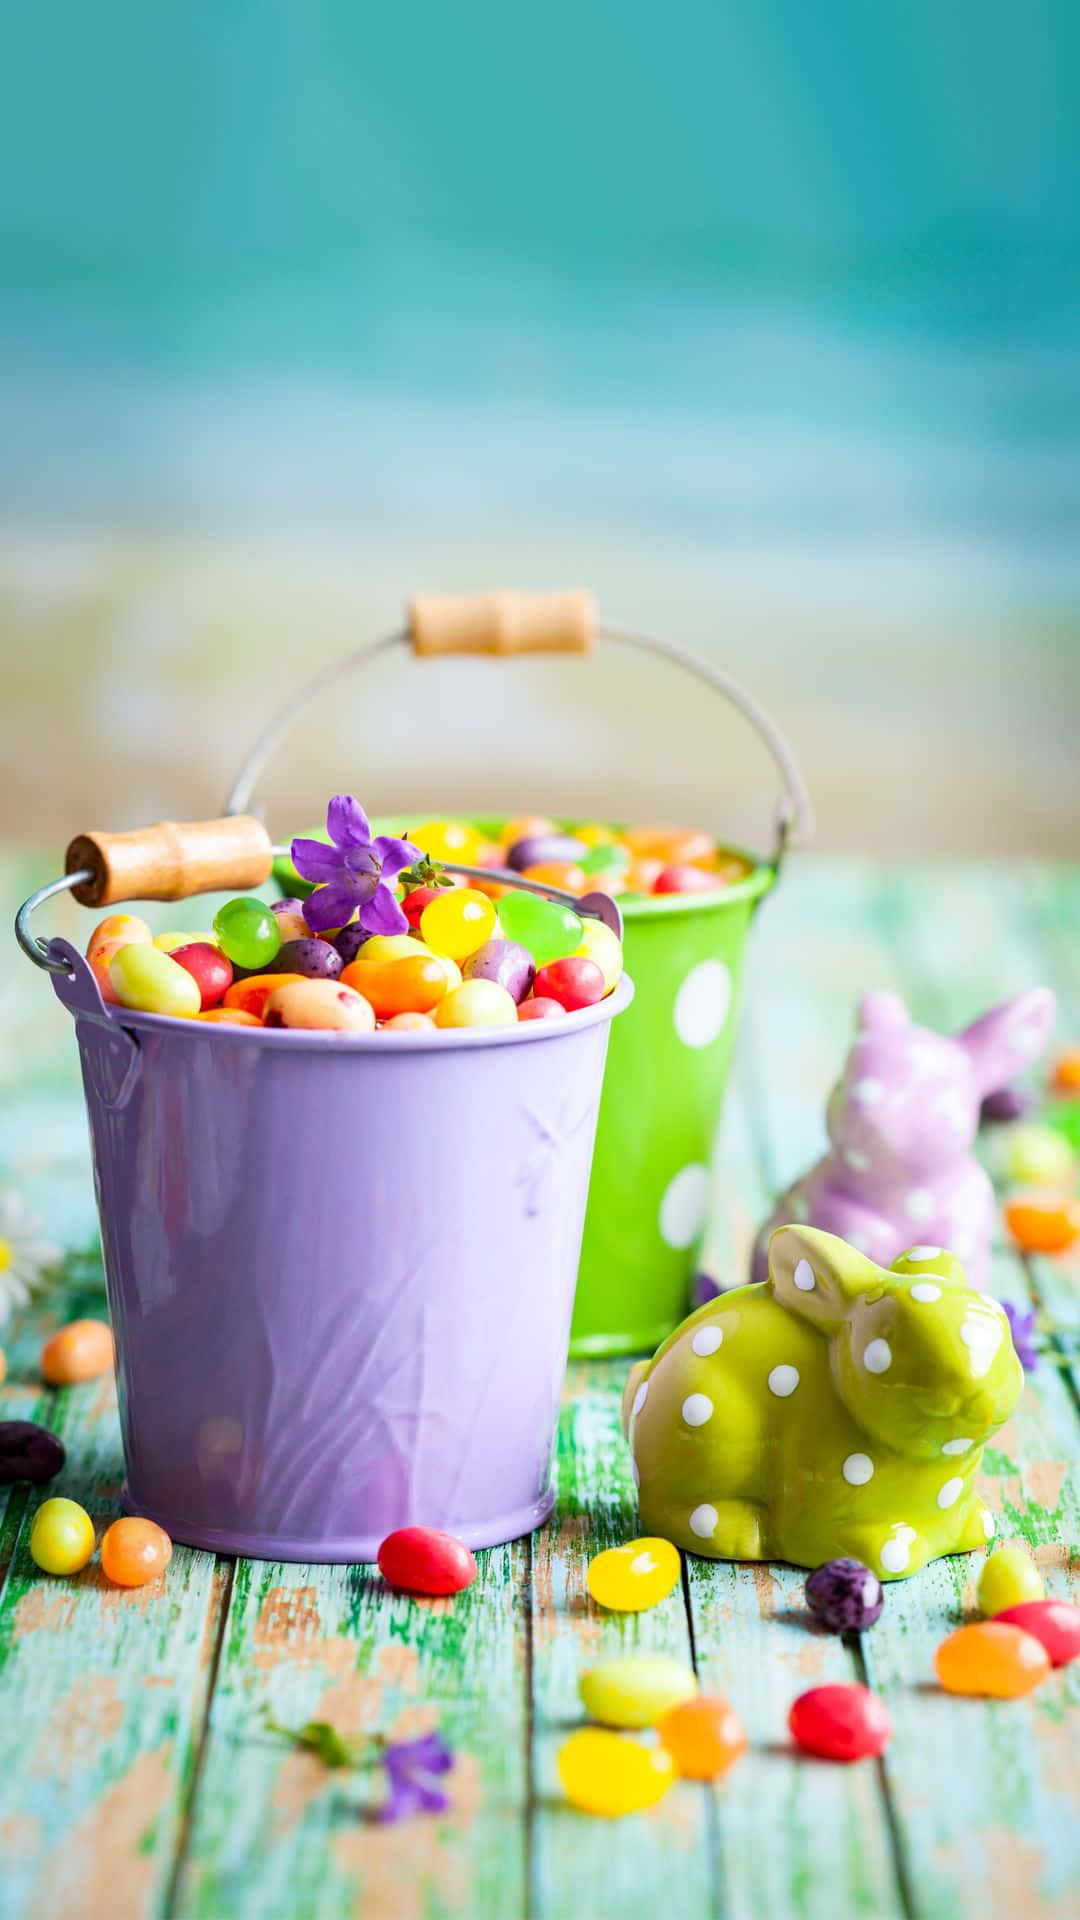 Easter Baskets With Candy On A Wooden Table Wallpaper